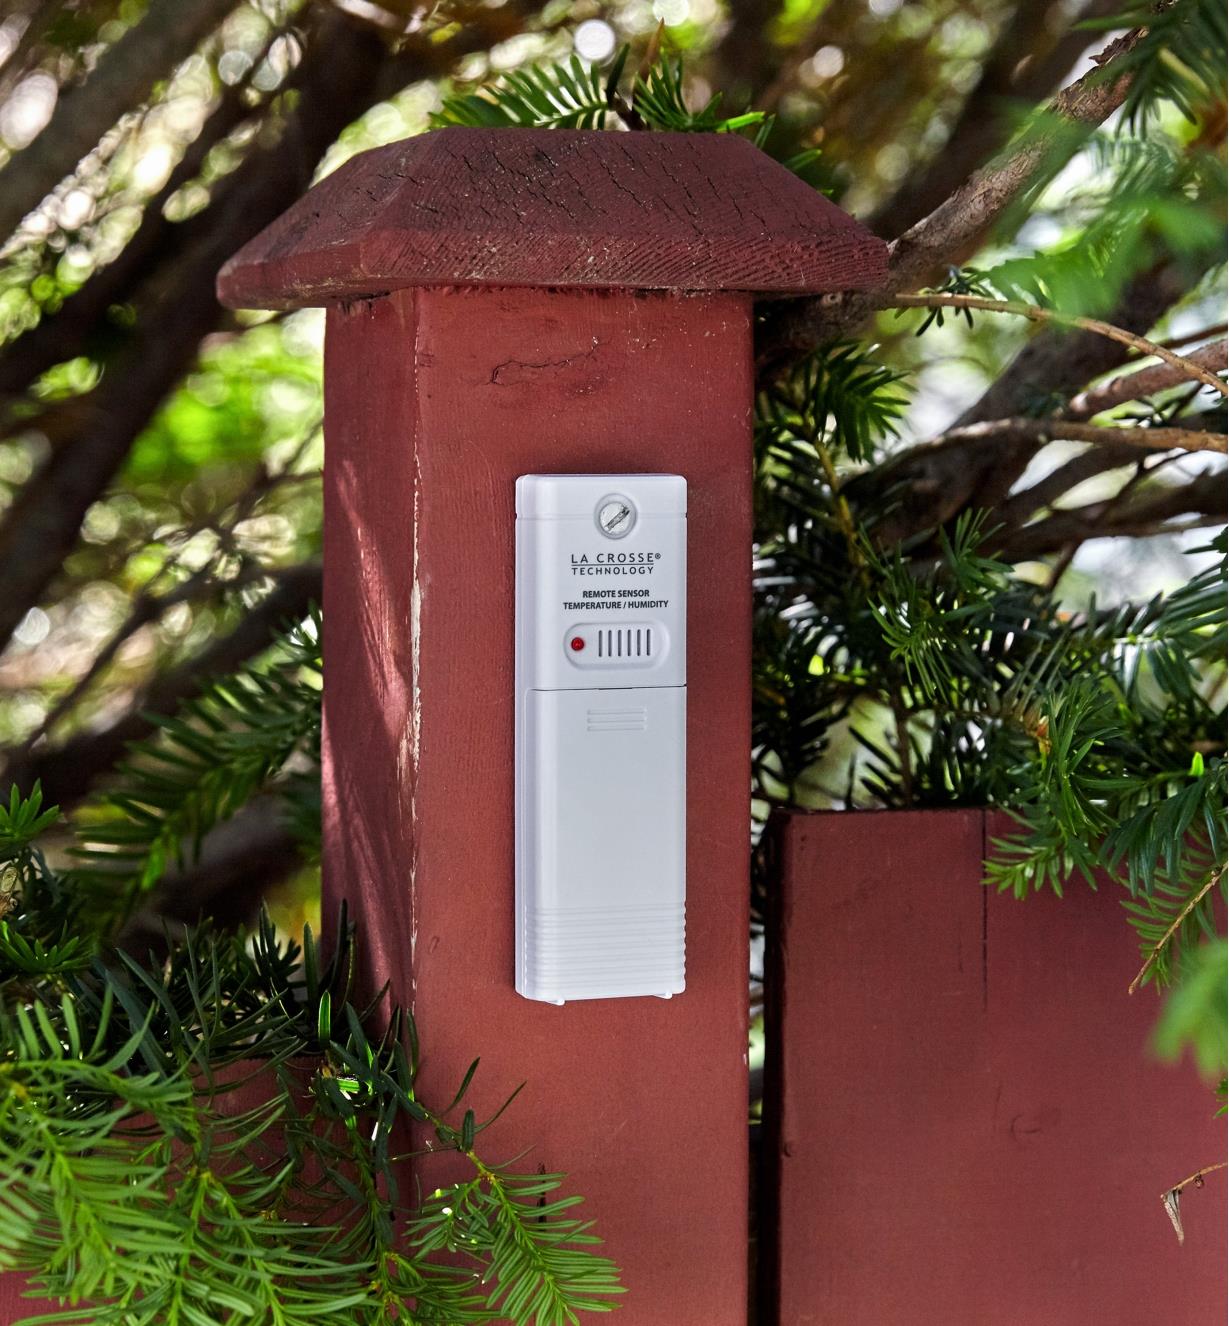 The wireless weather station’s outdoor temperature/humidity sensor mounted on a post